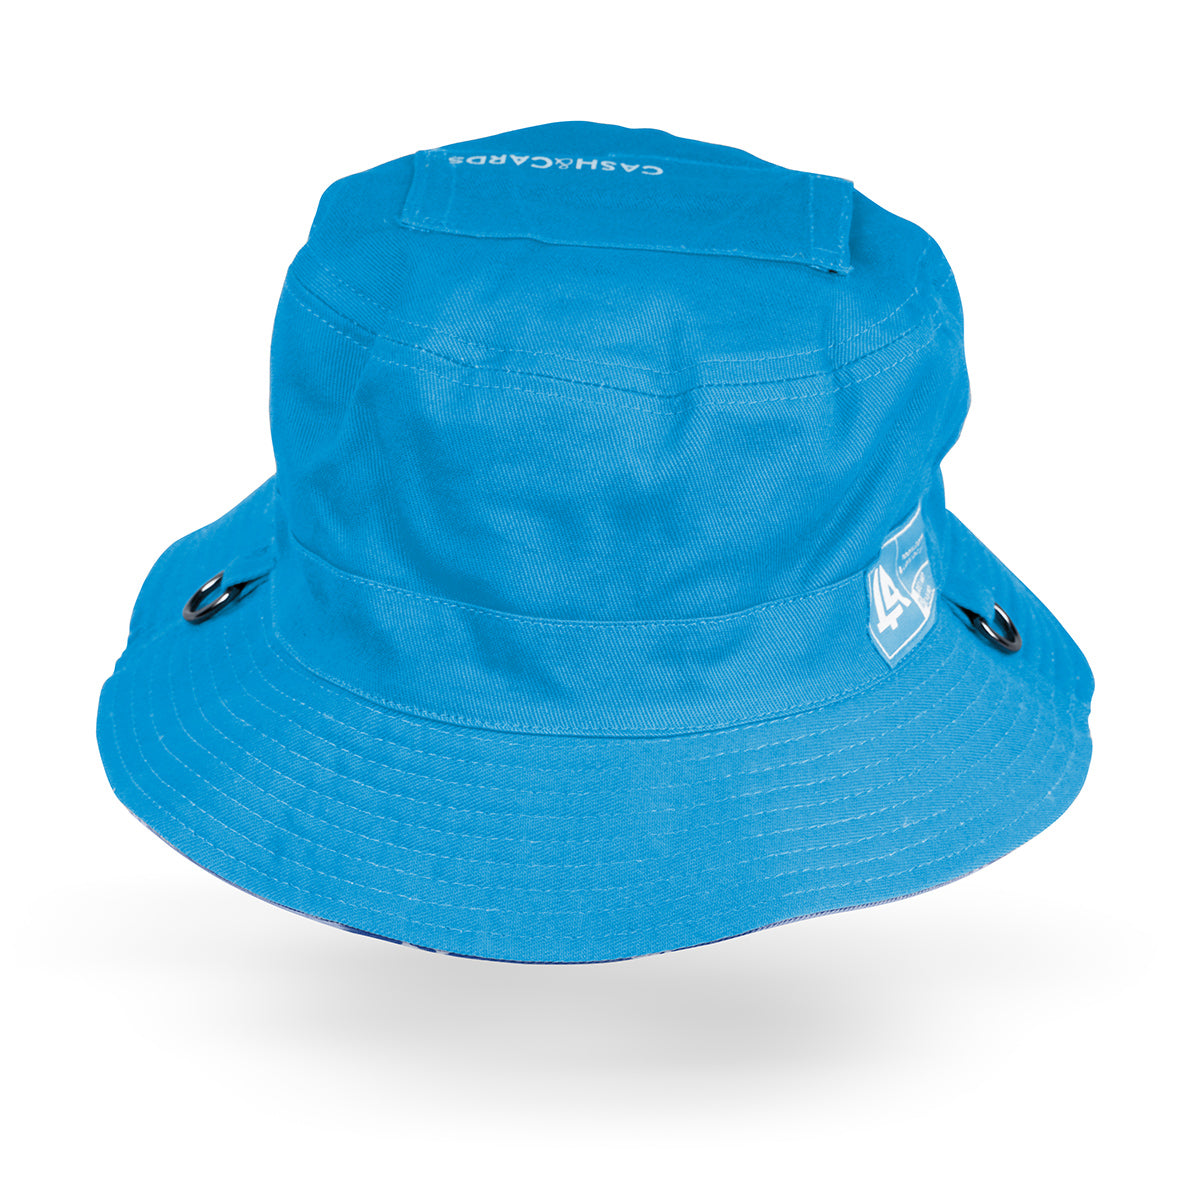 Lost Art Canada - blue coloured bucket hat inside back view